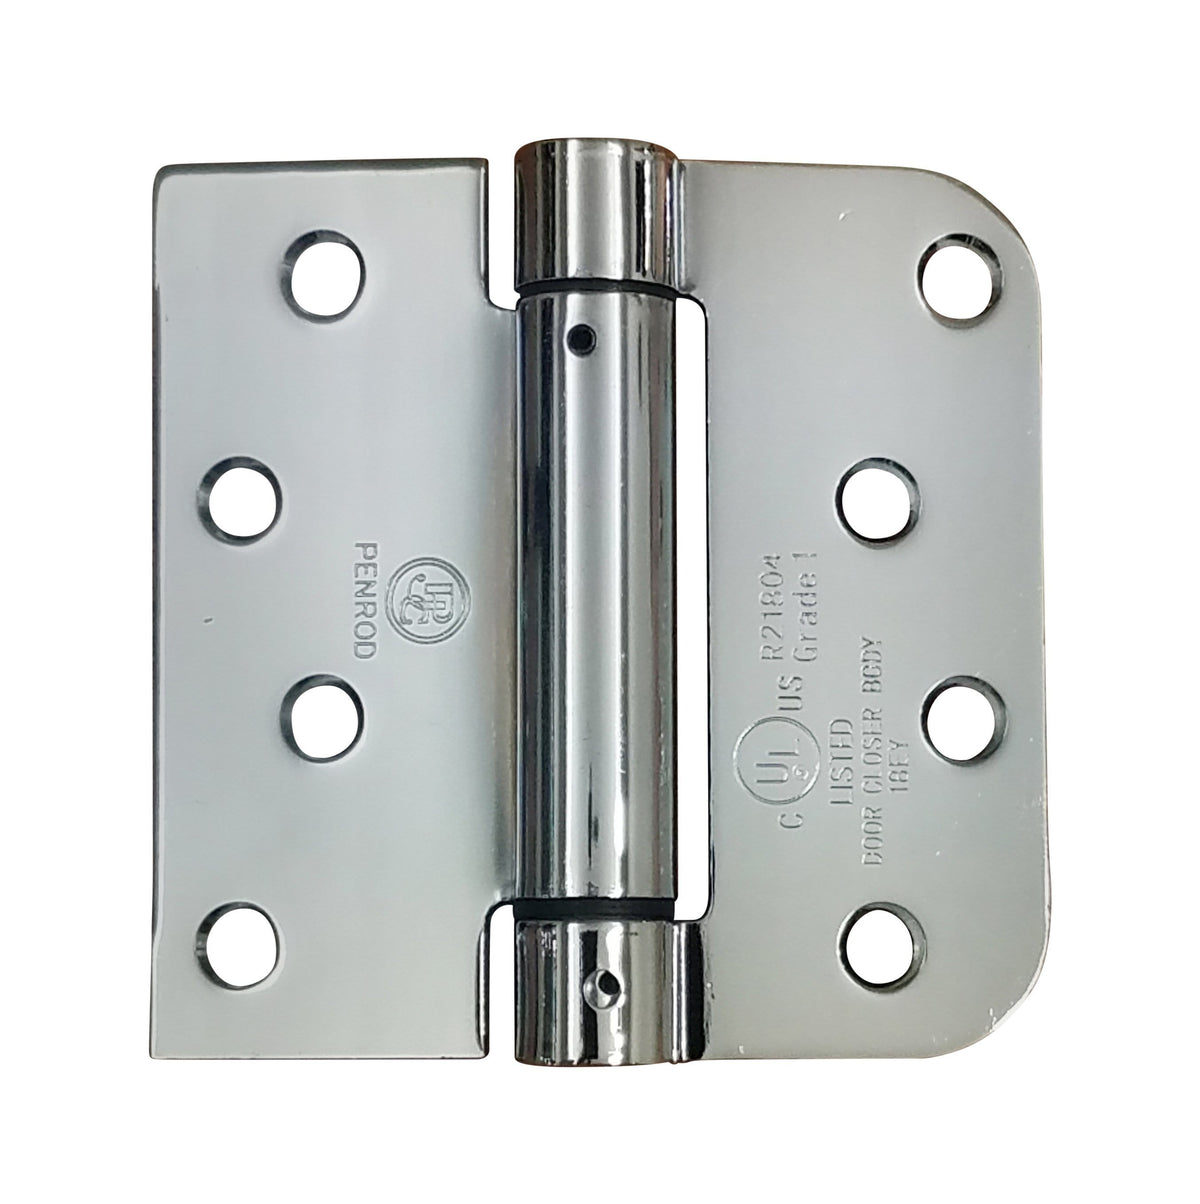 4" X 4" Spring Hinges With Square And 5/8" Radius Corner Polished Chrome Finish - 2 Pack